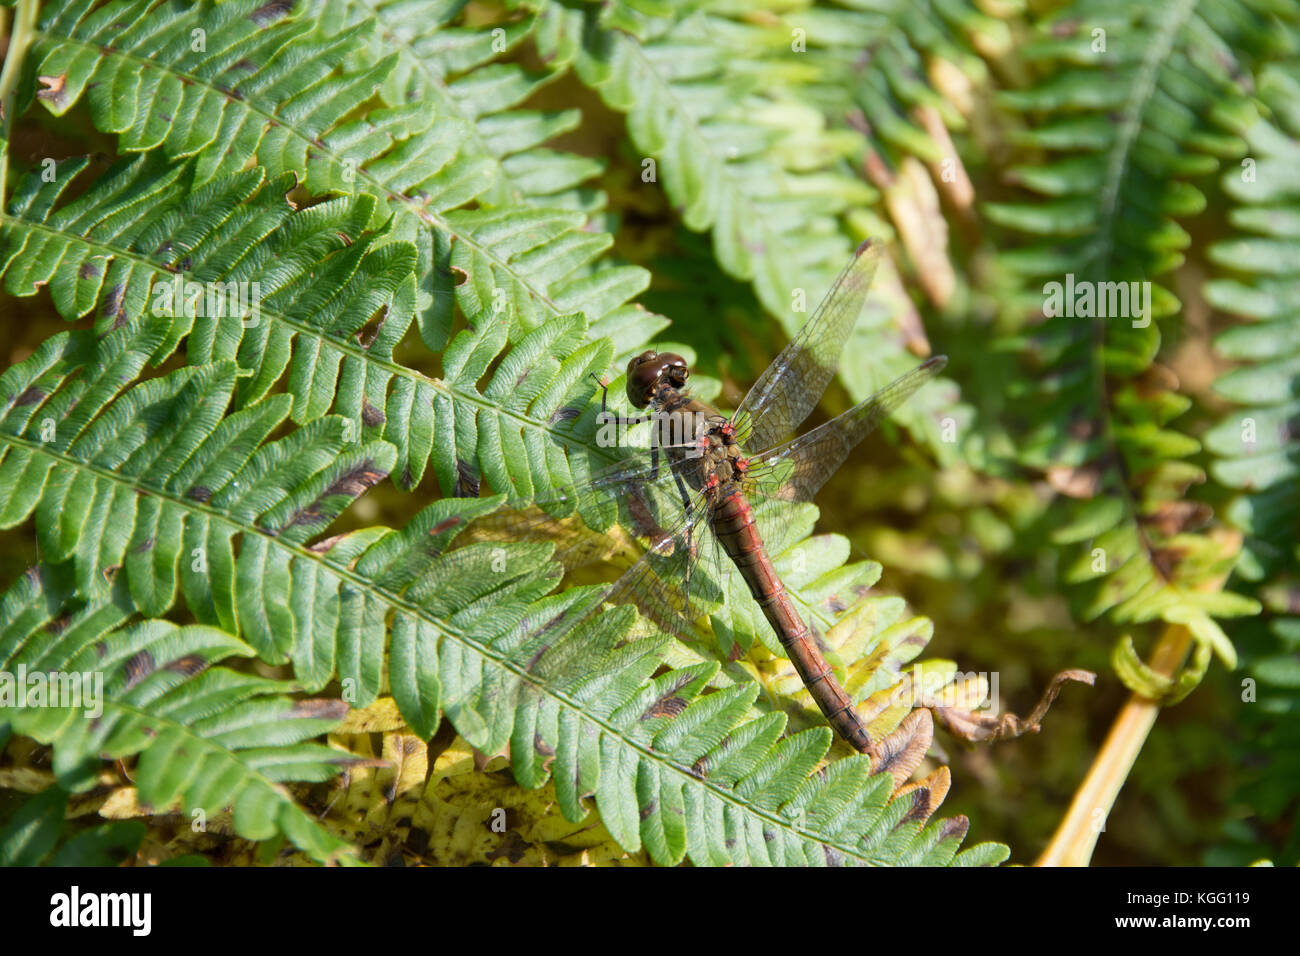 Close up of a common darter dragonfly resting on a bracken leaf Stock Photo